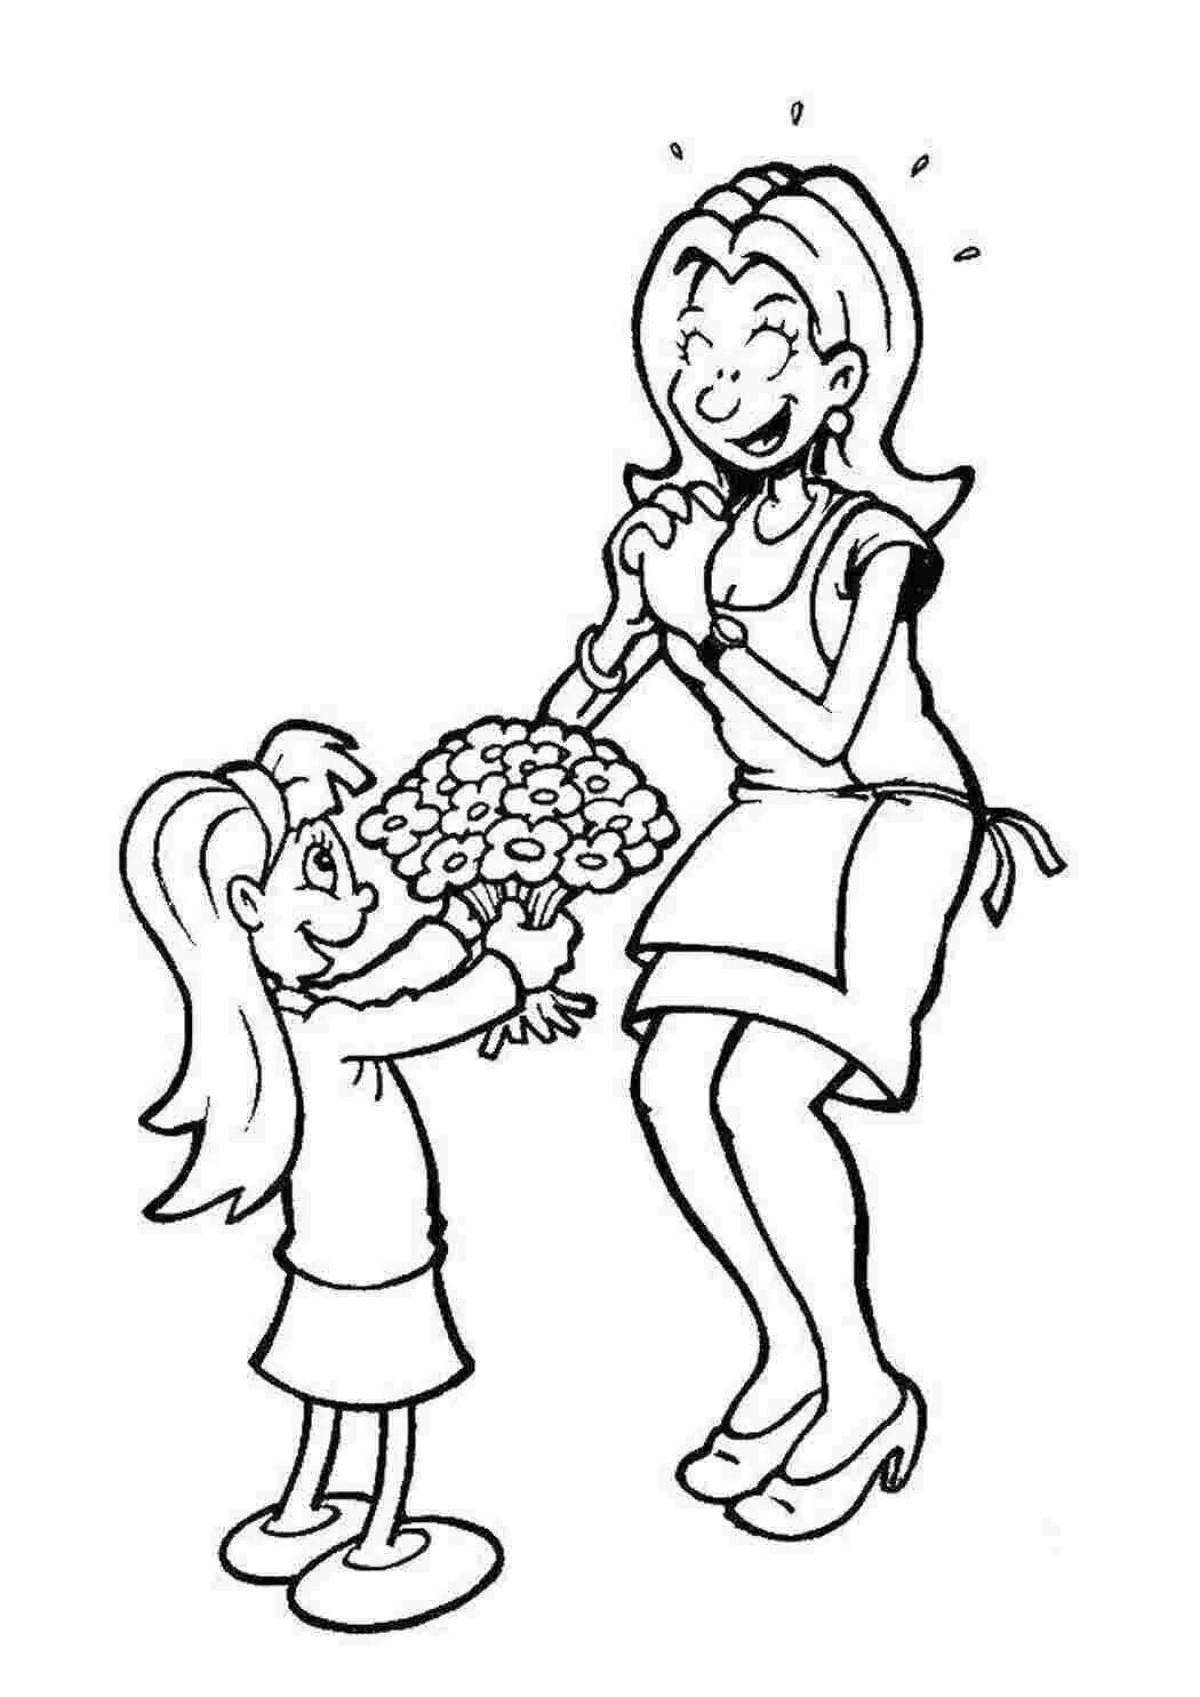 Coloring page loving daughter